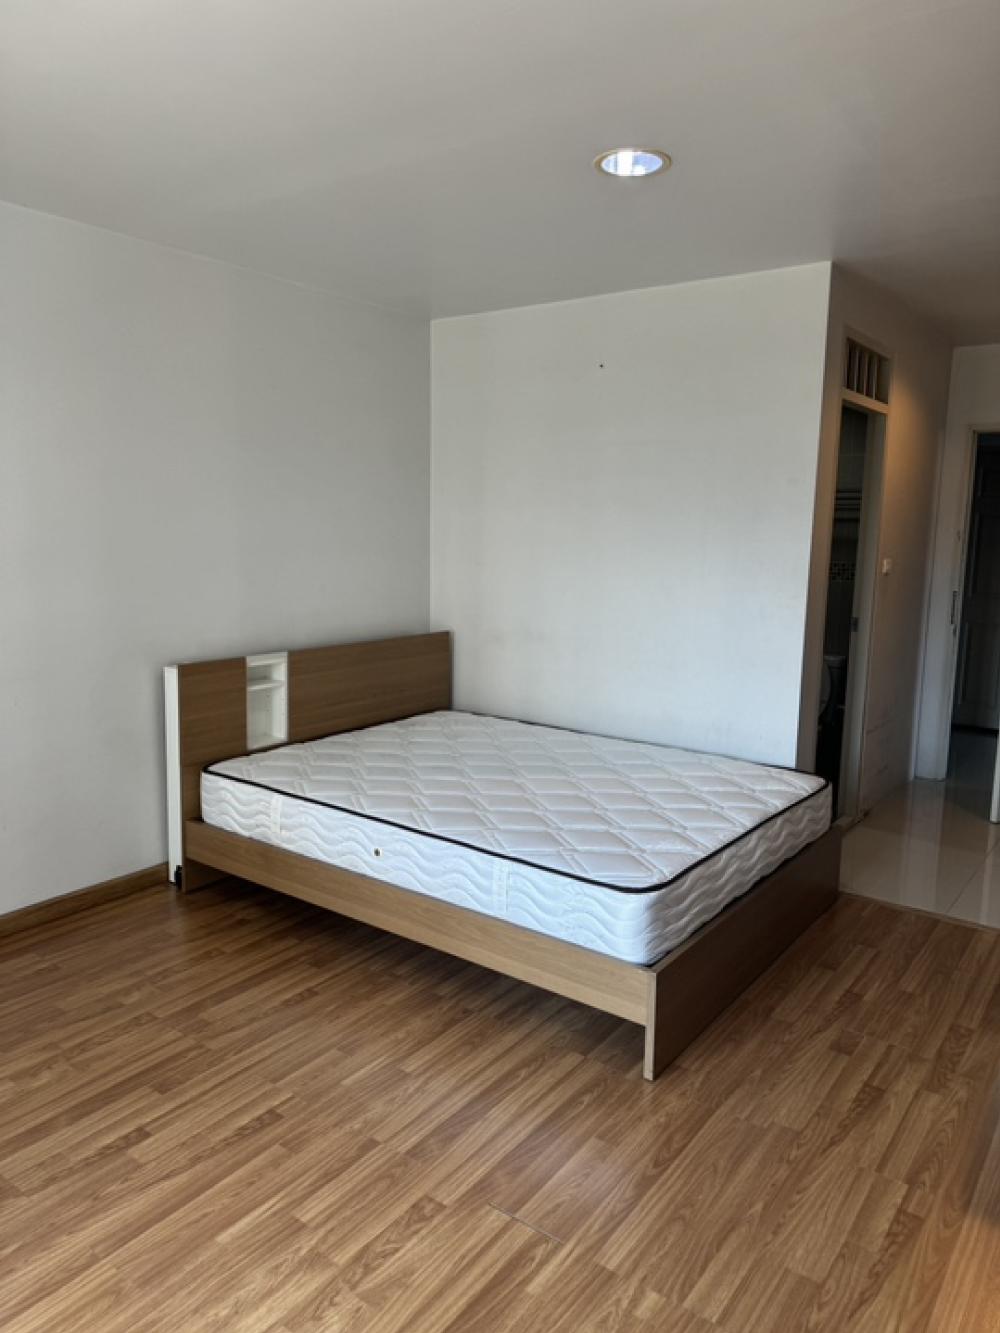 For RentCondoLadprao101, Happy Land, The Mall Bang Kapi : For rent ANNA condo Lat Phrao 101 - Pho Kaeo 3, fully furnished. There is a washing machine.